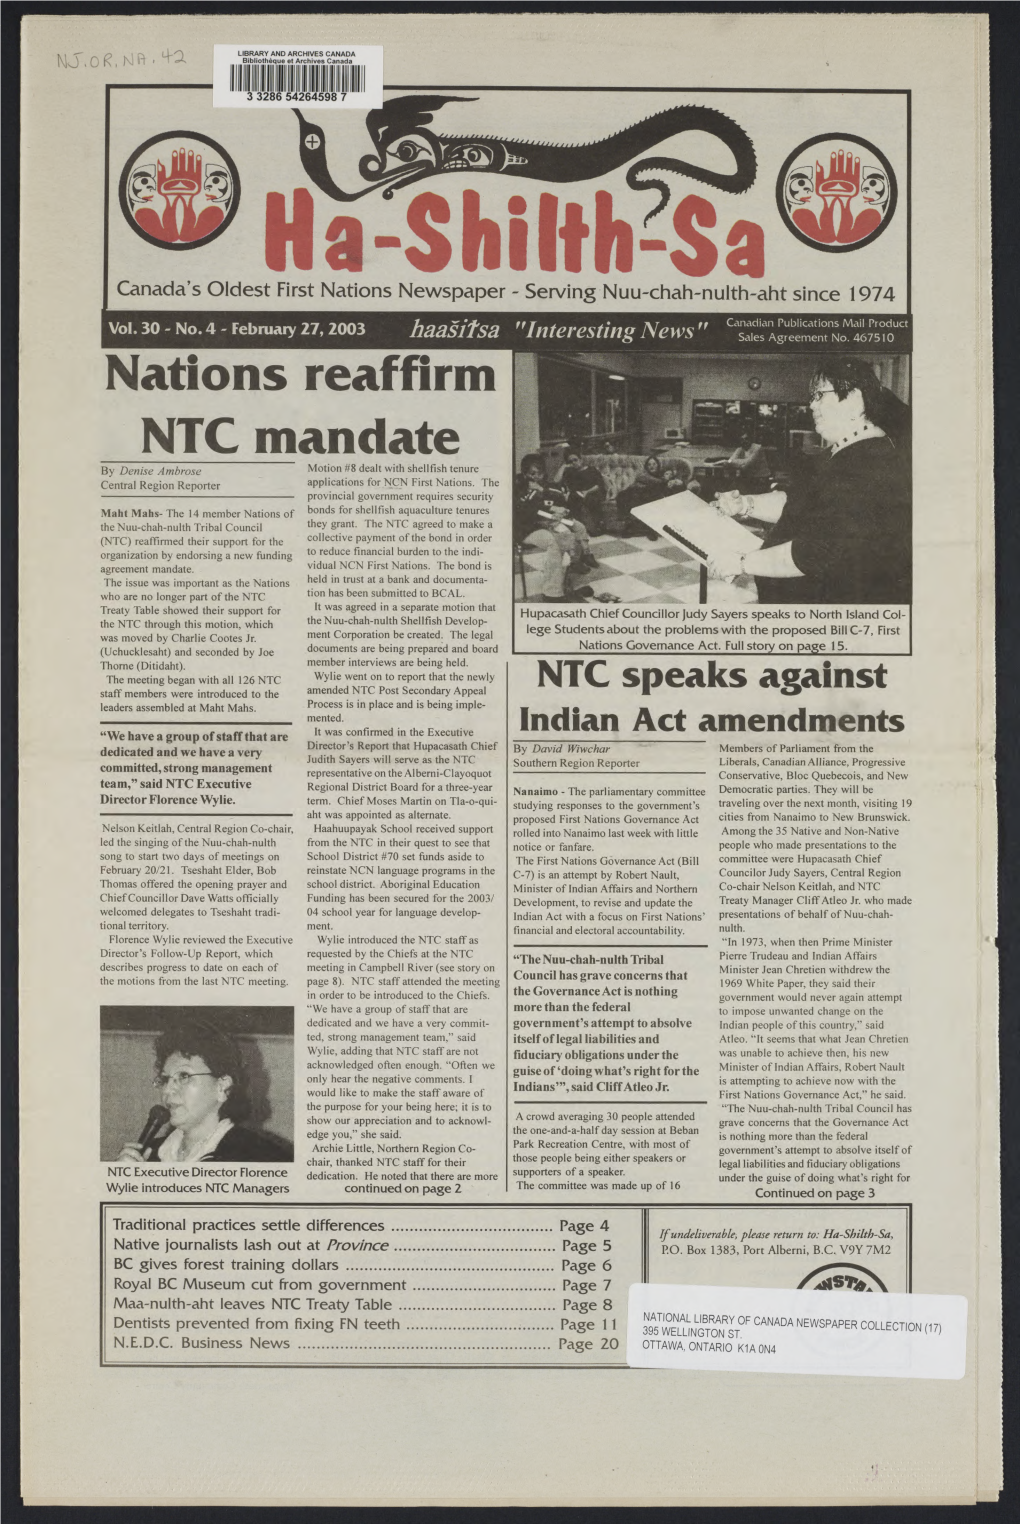 NTC Mandate -Iln Q`, by Denise Ambrose Motion #8 Dealt with Shellfish Tenure Central Region Reporter Applications for NCN First Nations